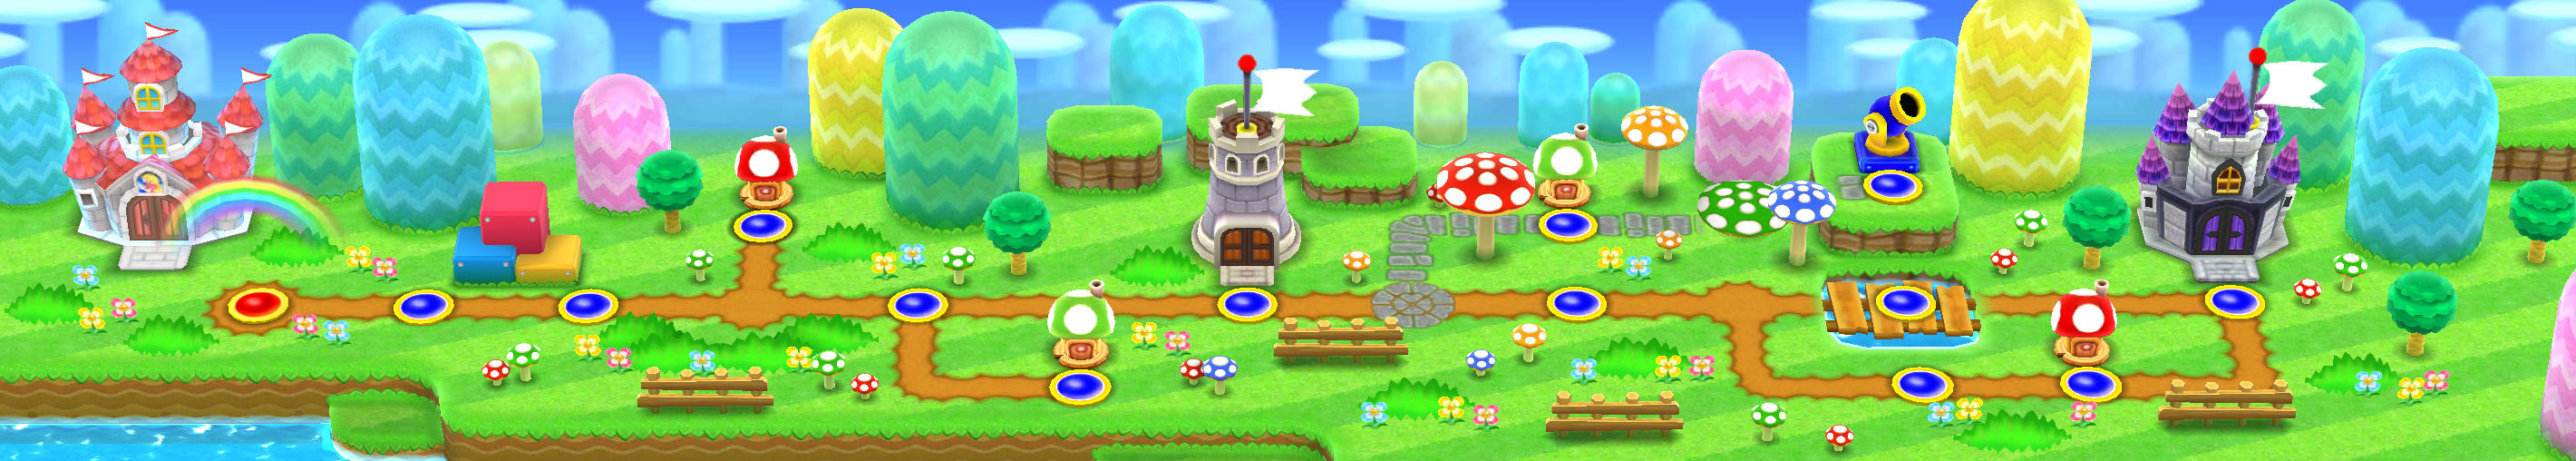 https://www.mariowiki.com/images/a/a8/NSMB2_Complete_World_1_Map.jpg